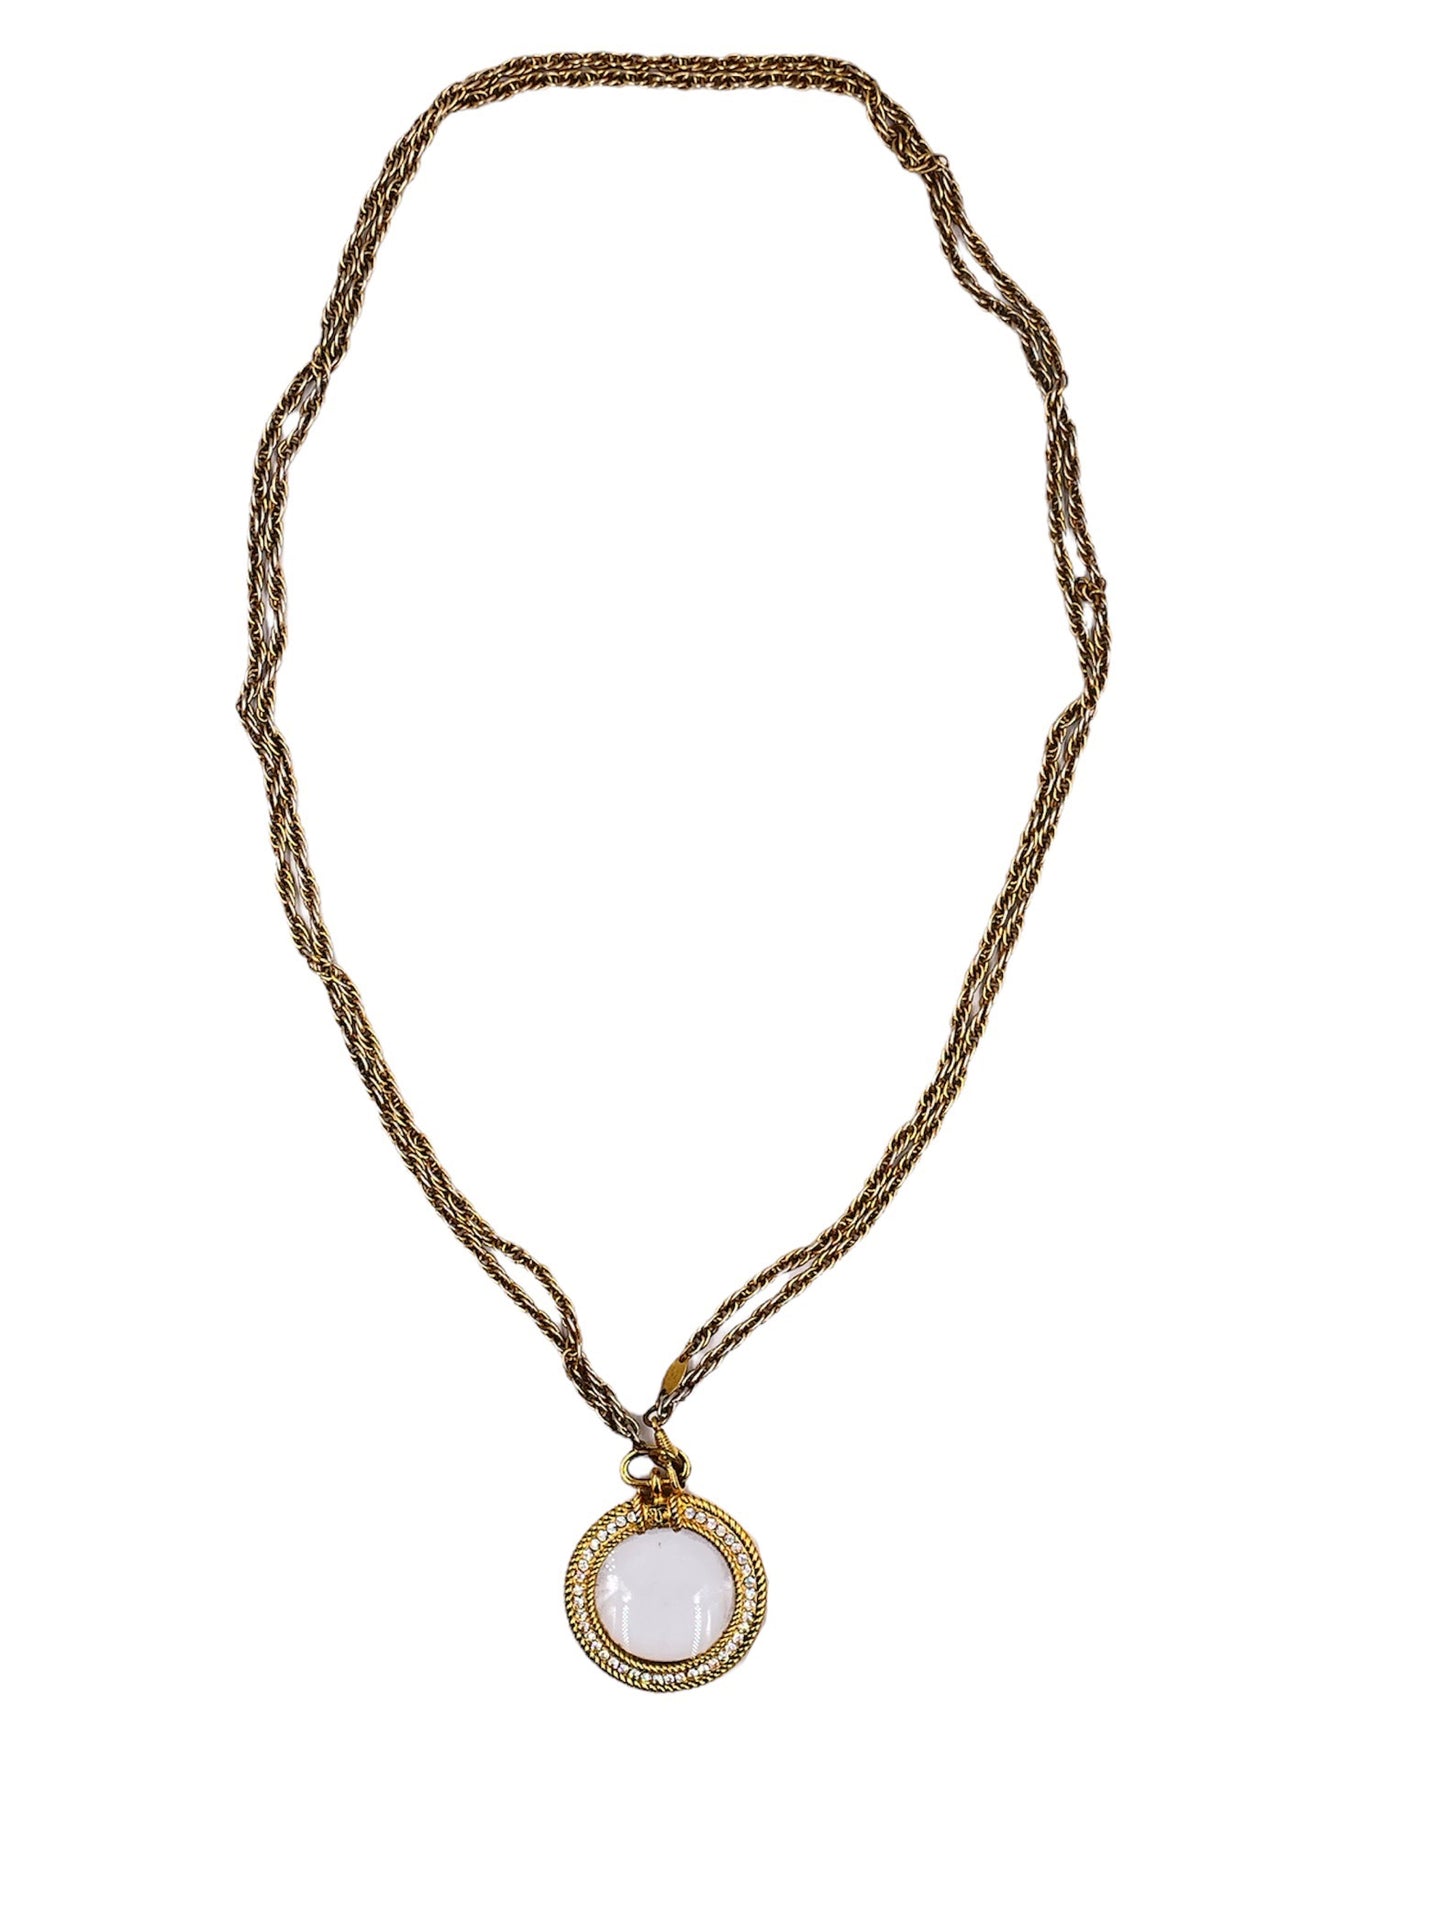 Chanel Magnifying Glass Loupe Pendant Necklace - Chanel